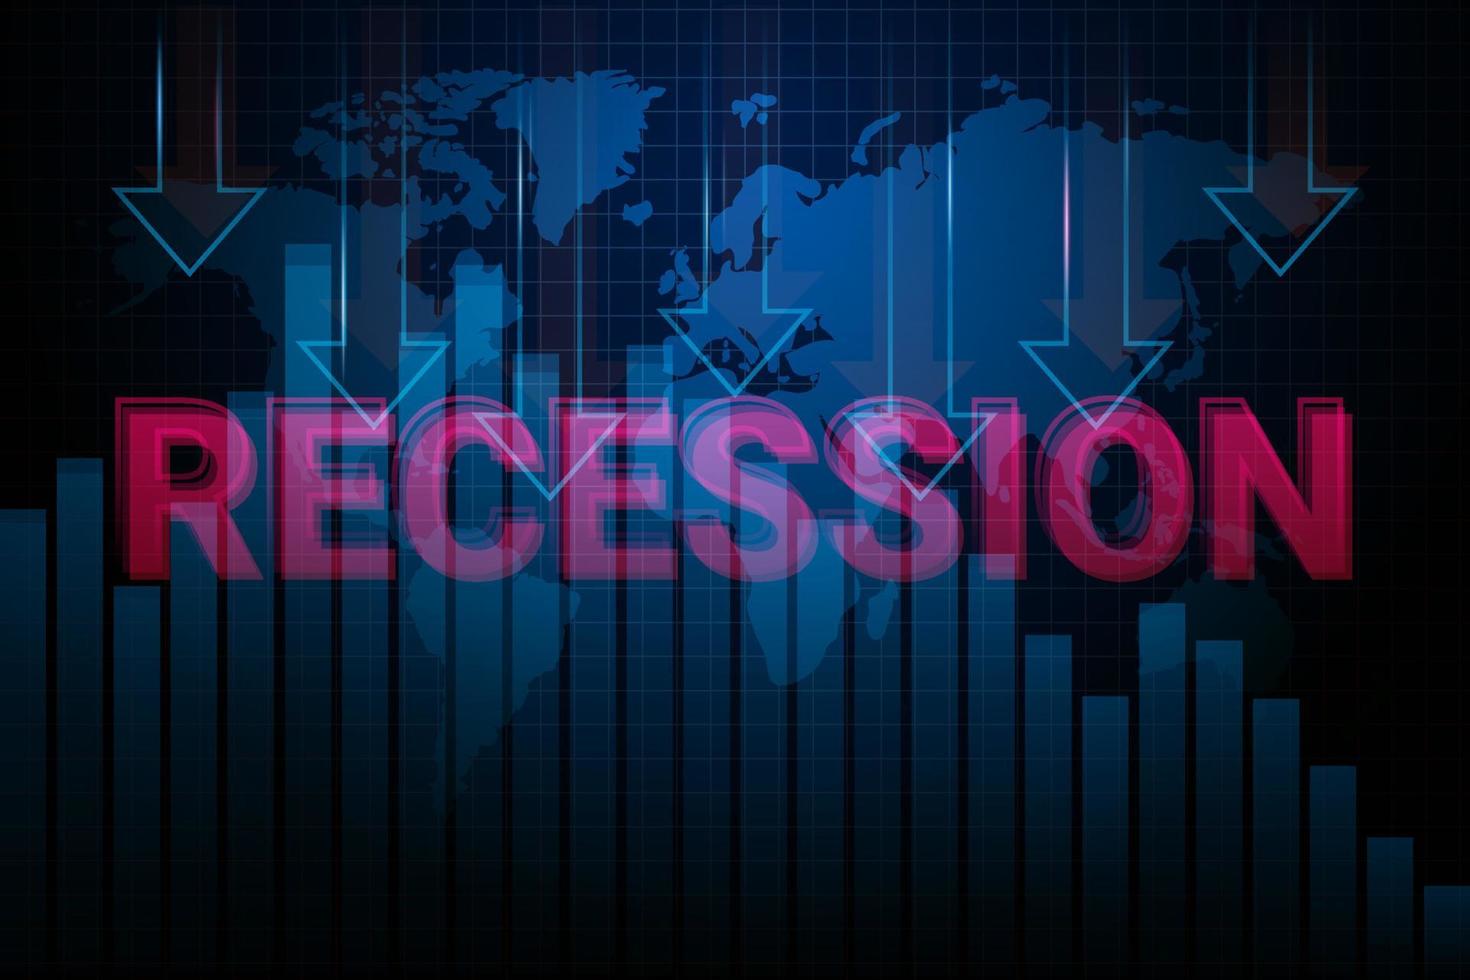 2023 Economy recession, global business downfall with falling arrow and world map. Money losing. Stock crisis, financial crisis and finance concept background. vector